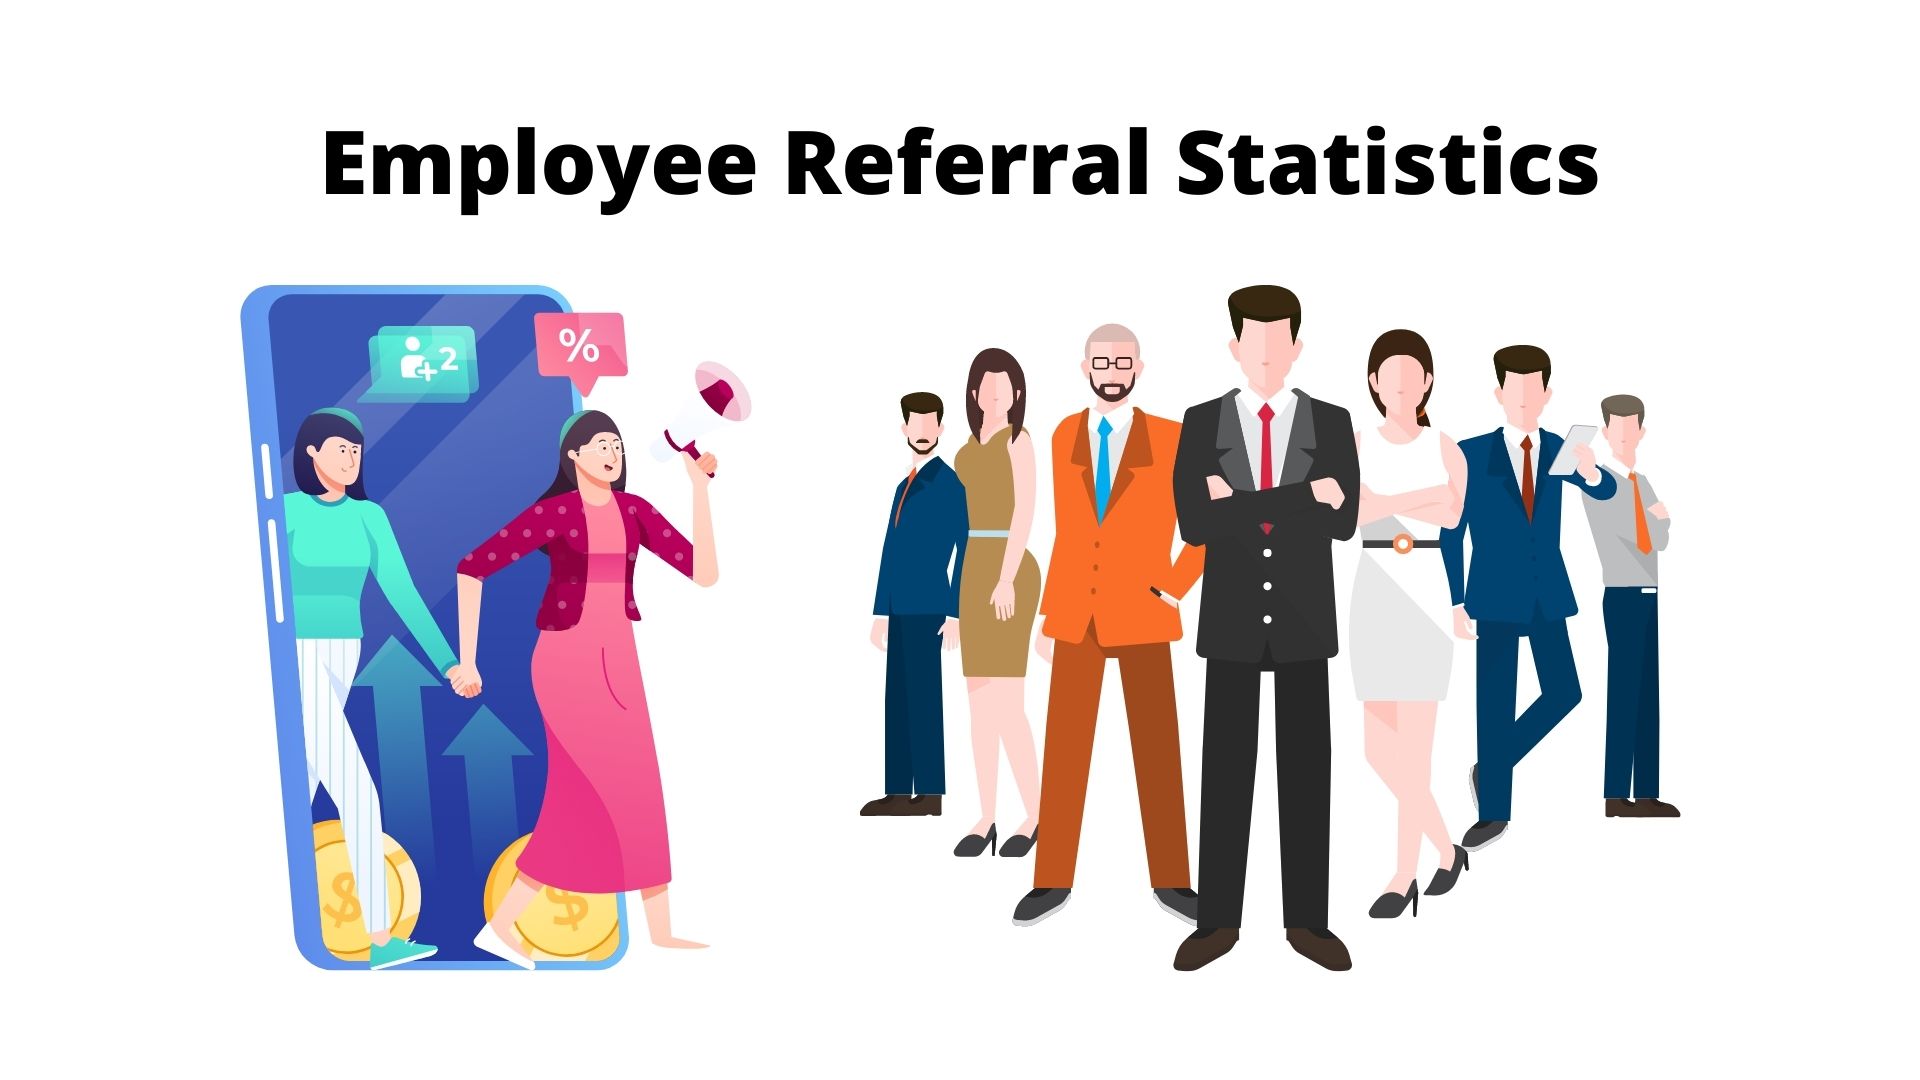 30+ Amazing Employee Referral Statistics, Facts and Trends